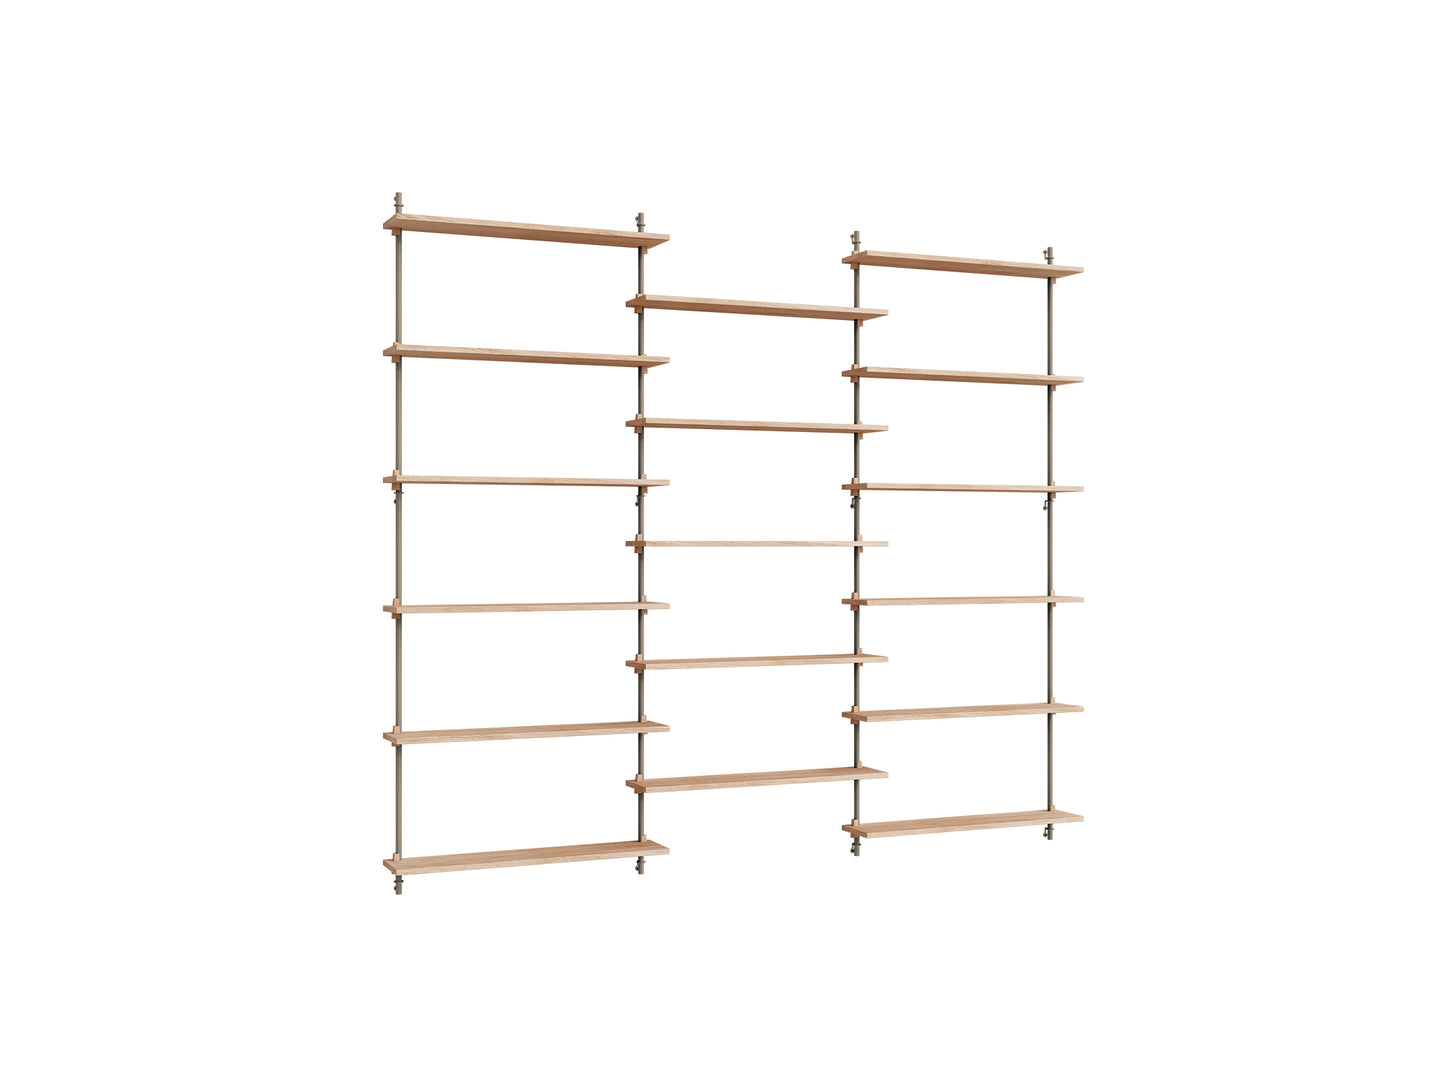 Wall Shelving System Sets (200 cm) by Moebe - WS.200.3 / Warm Grey Uprights / Oiled Oak